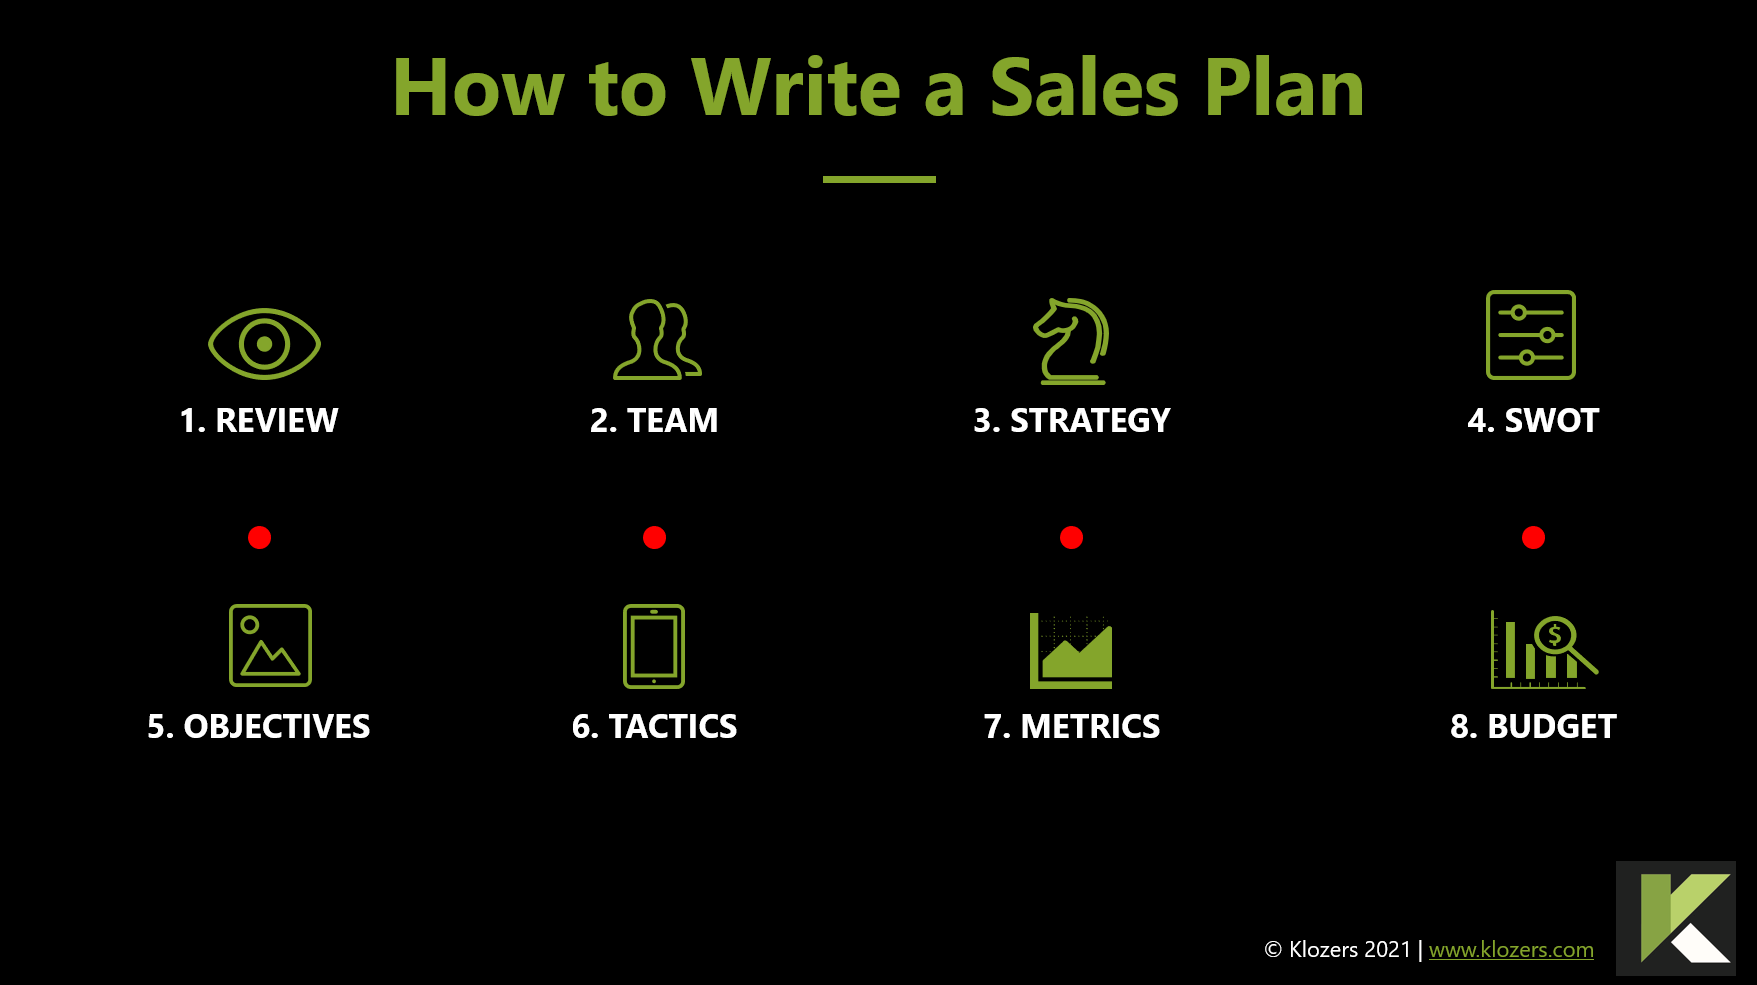 How to a Sales Plan in 8 Easy Steps (with FREE Template) - Klozers